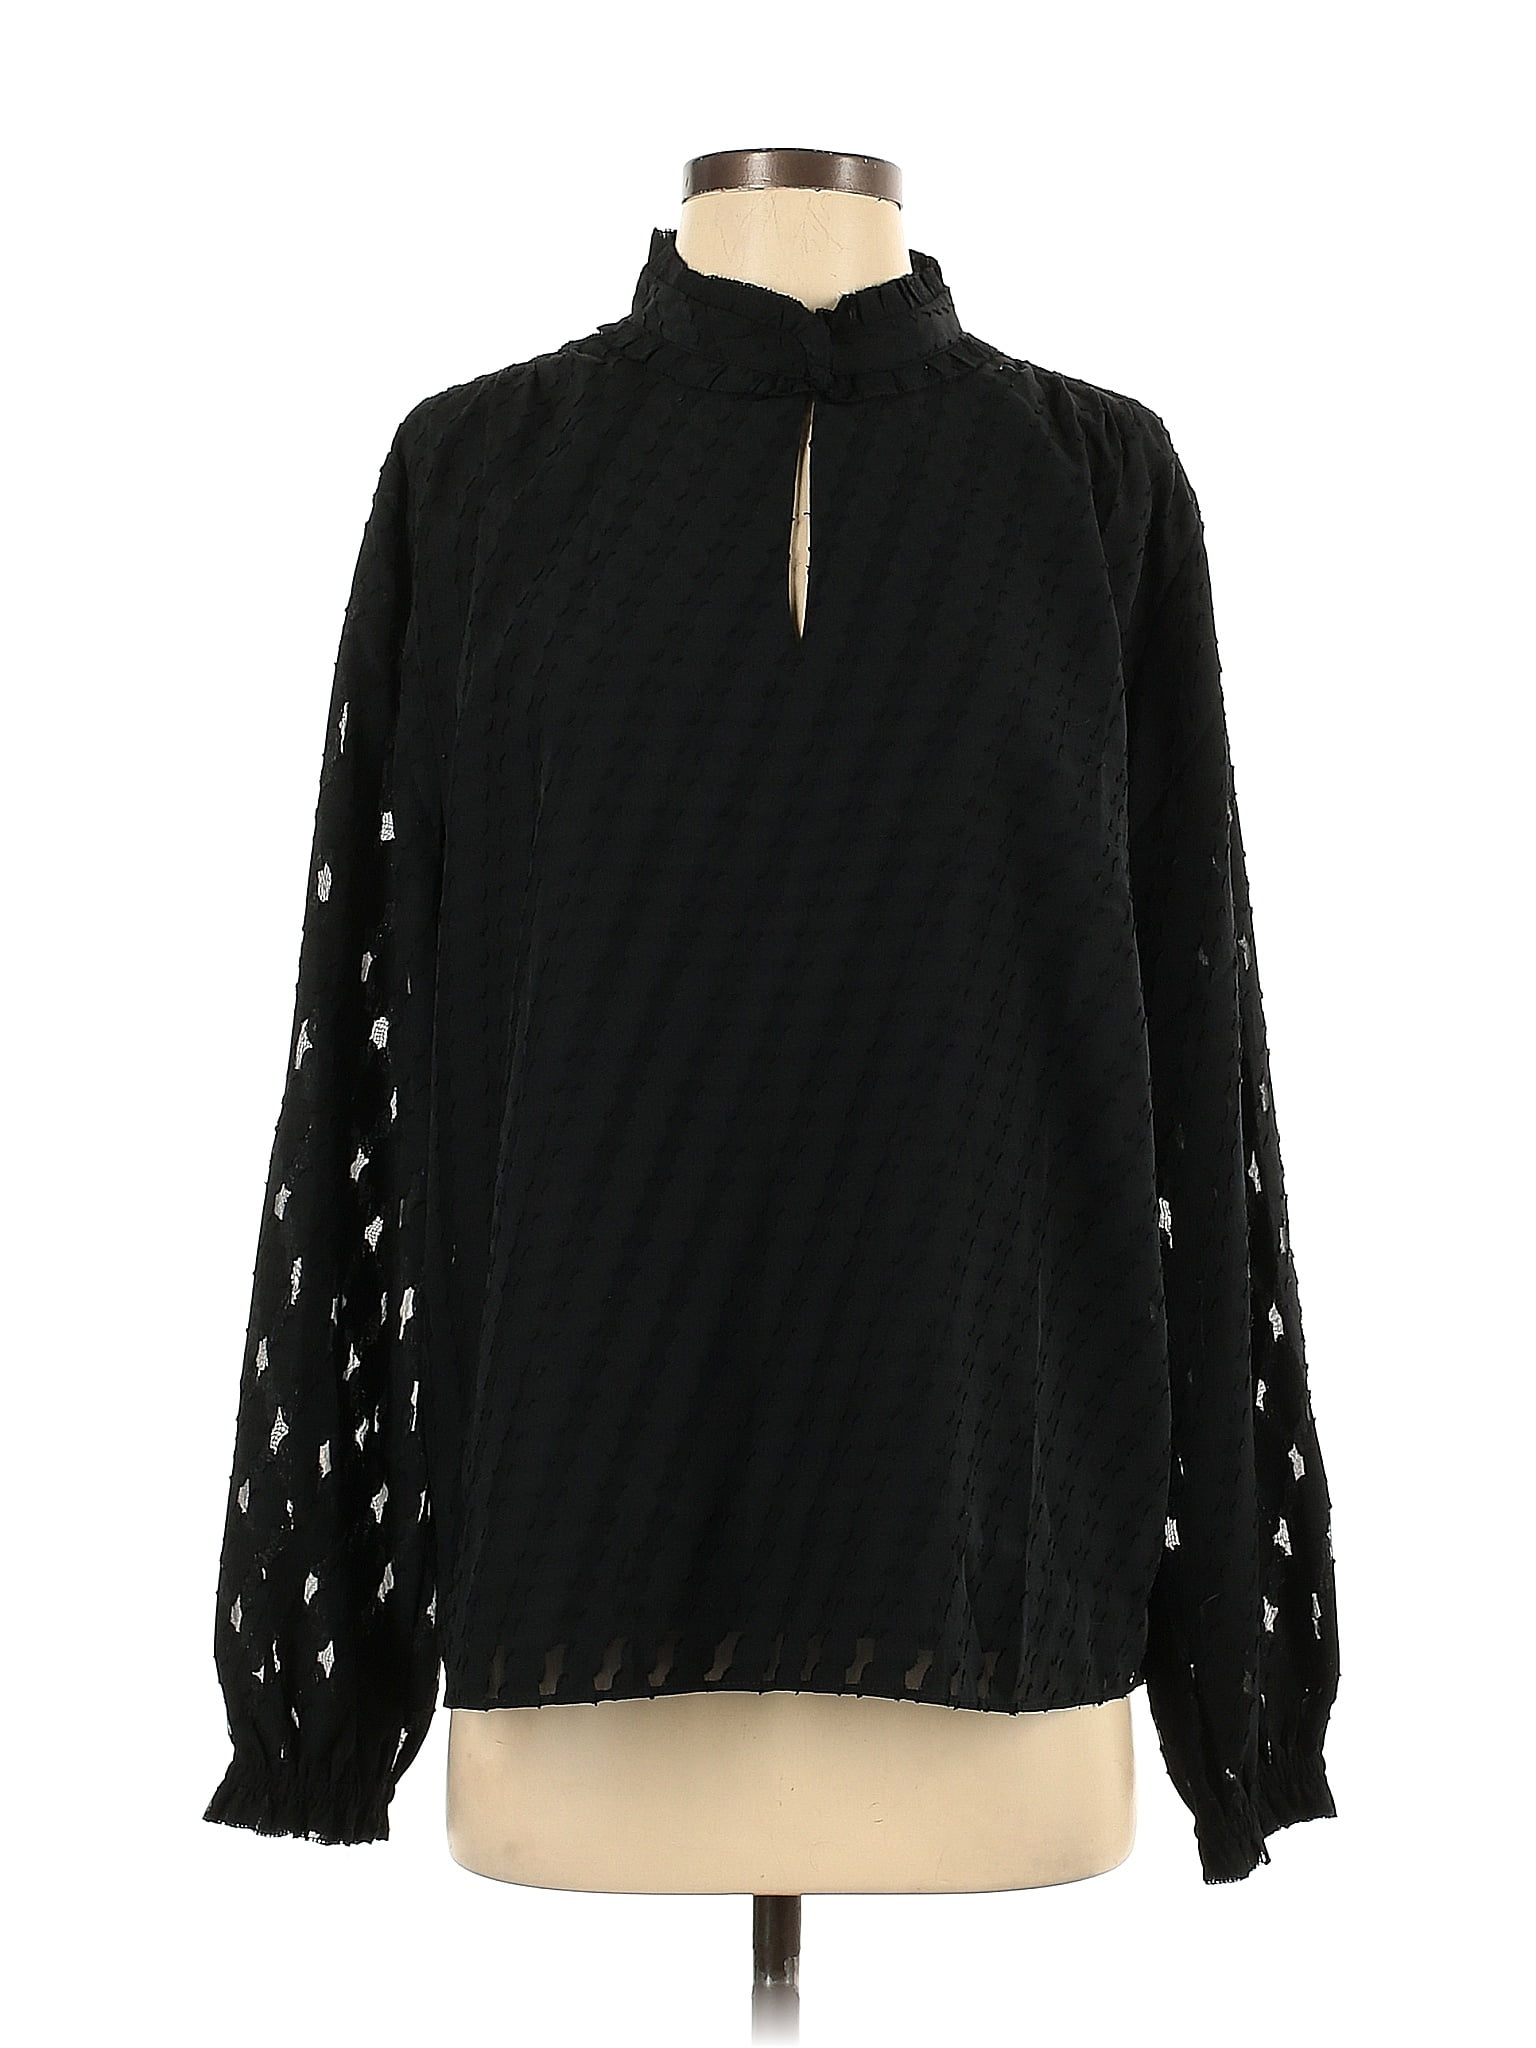 Ann Taylor 100% Polyester Black Long Sleeve Blouse Size L - 74% off ...